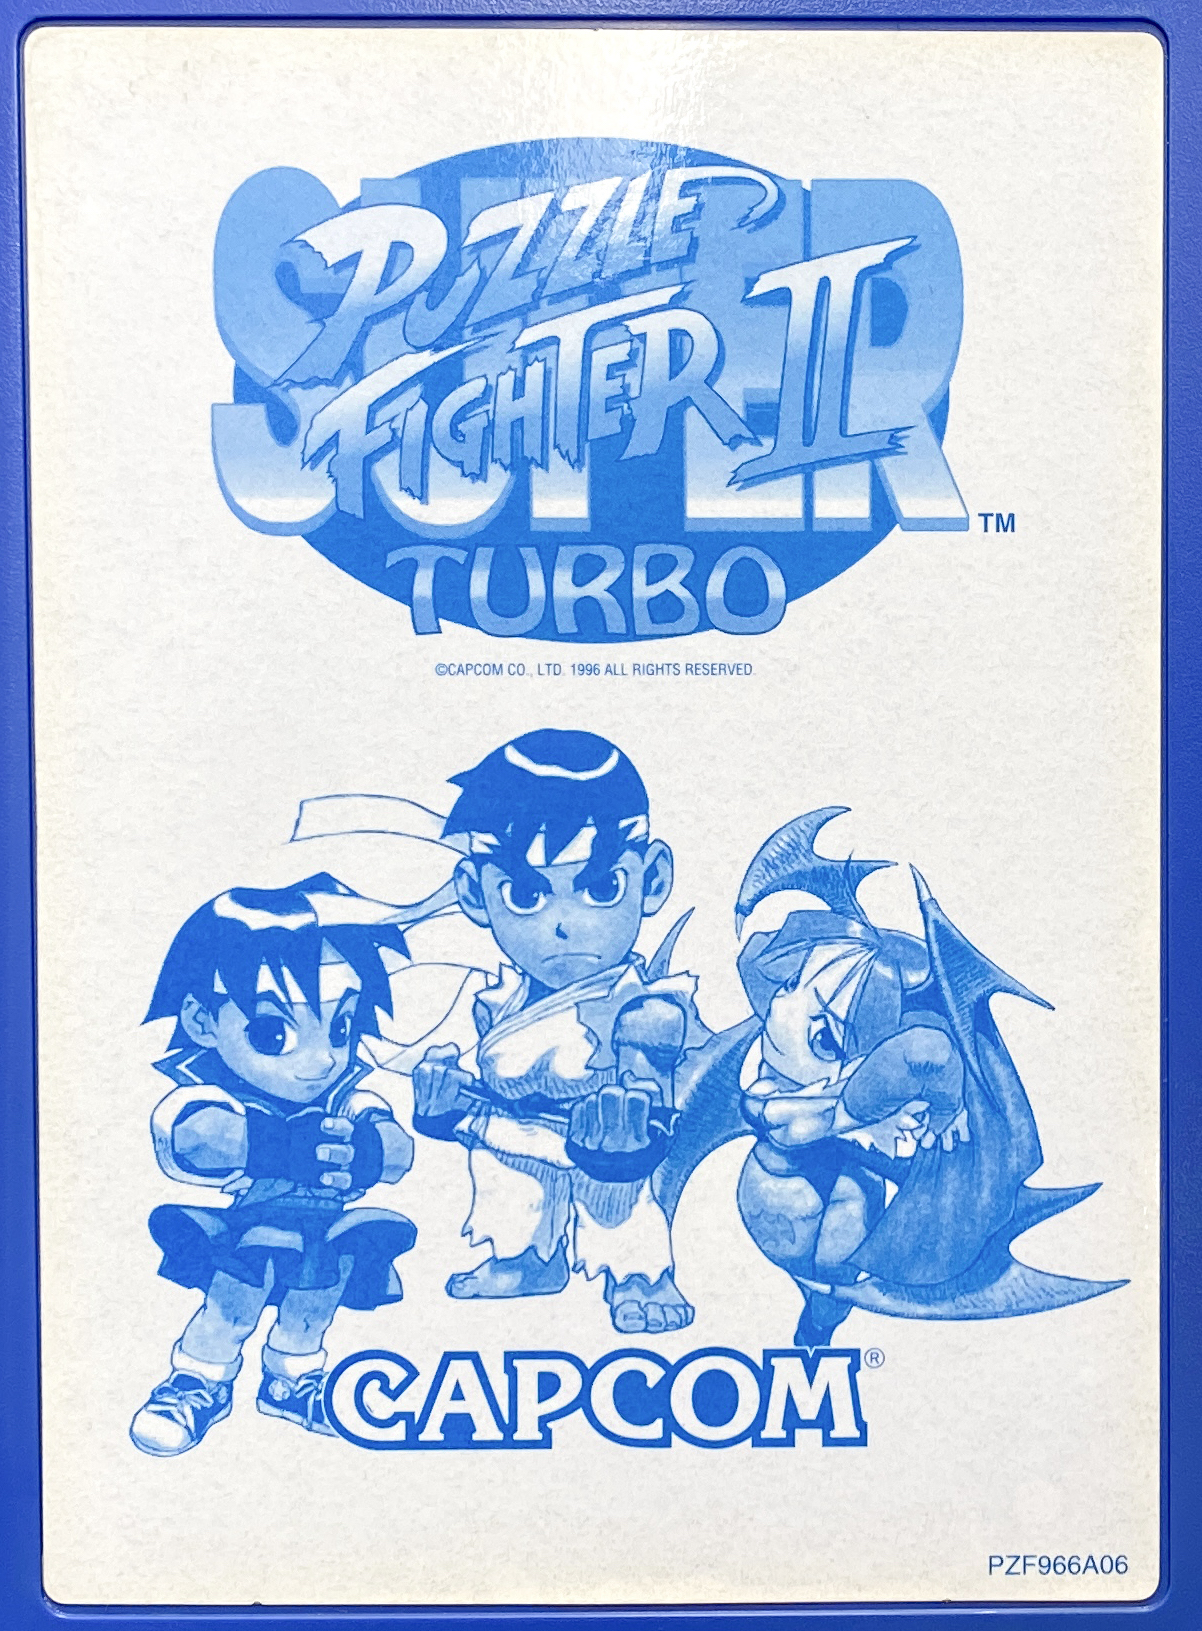 Cps2 super puzzle fighter ii turbo english label.jpg